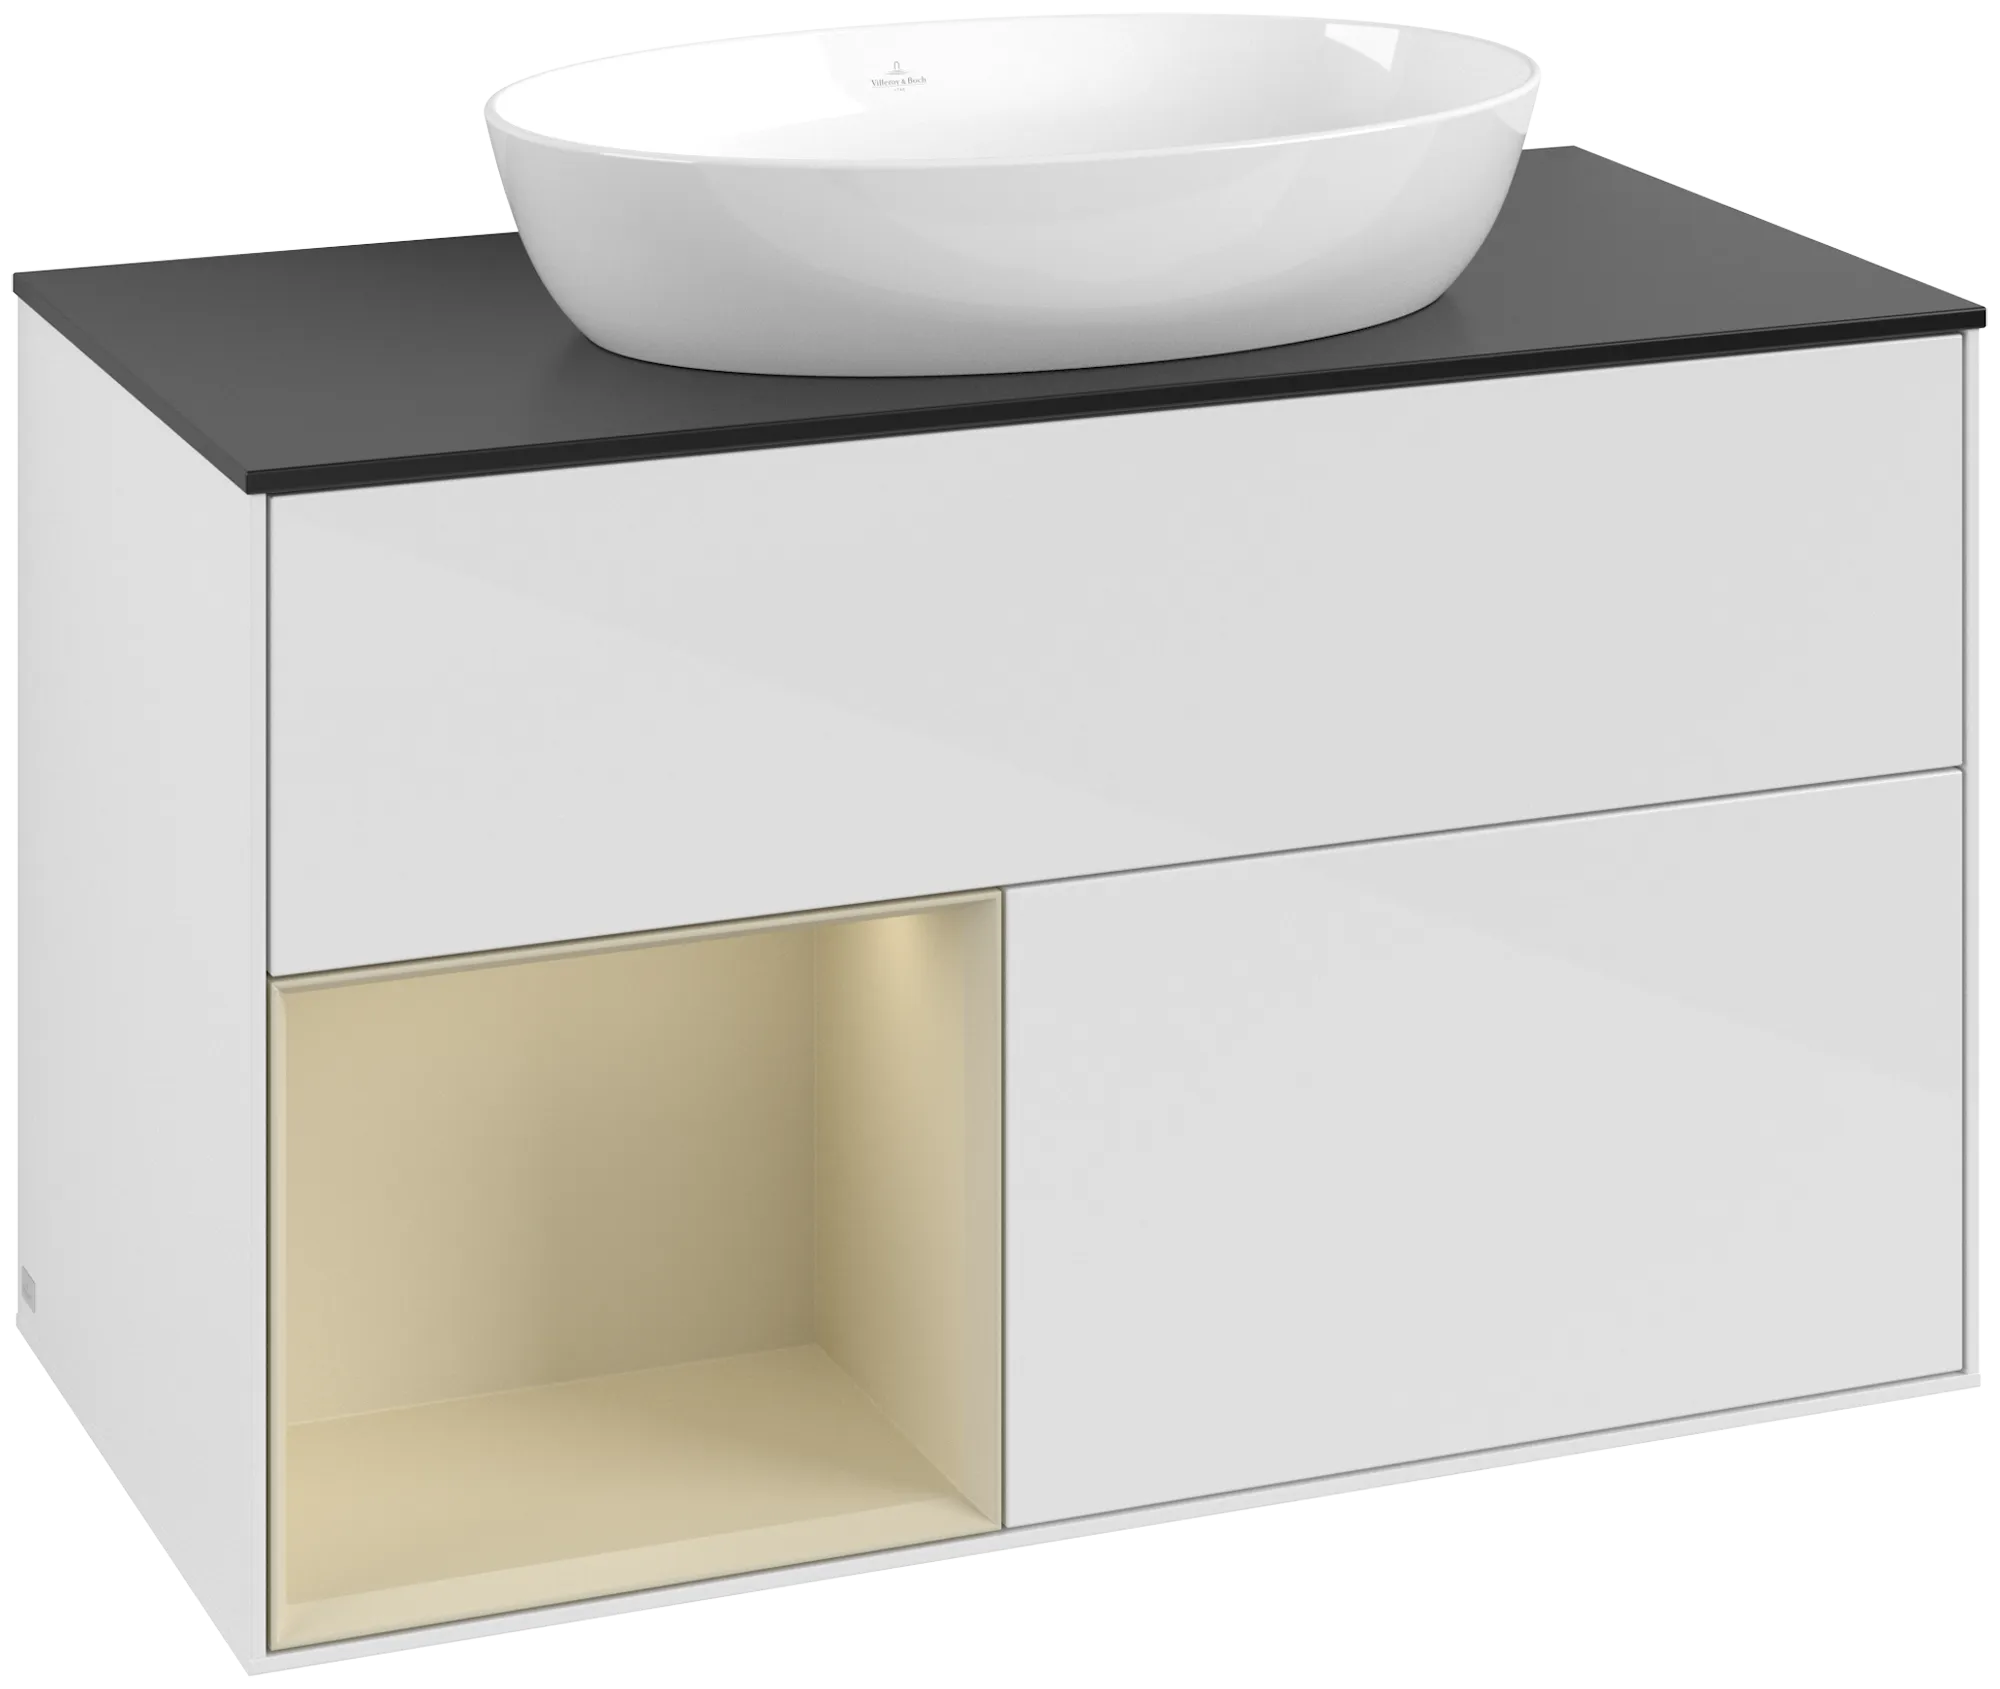 VILLEROY BOCH Finion Vanity unit, with lighting, 2 pull-out compartments, 1000 x 603 x 501 mm, Glossy White Lacquer / Silk Grey Matt Lacquer / Glass Black Matt #GA12HJGF resmi